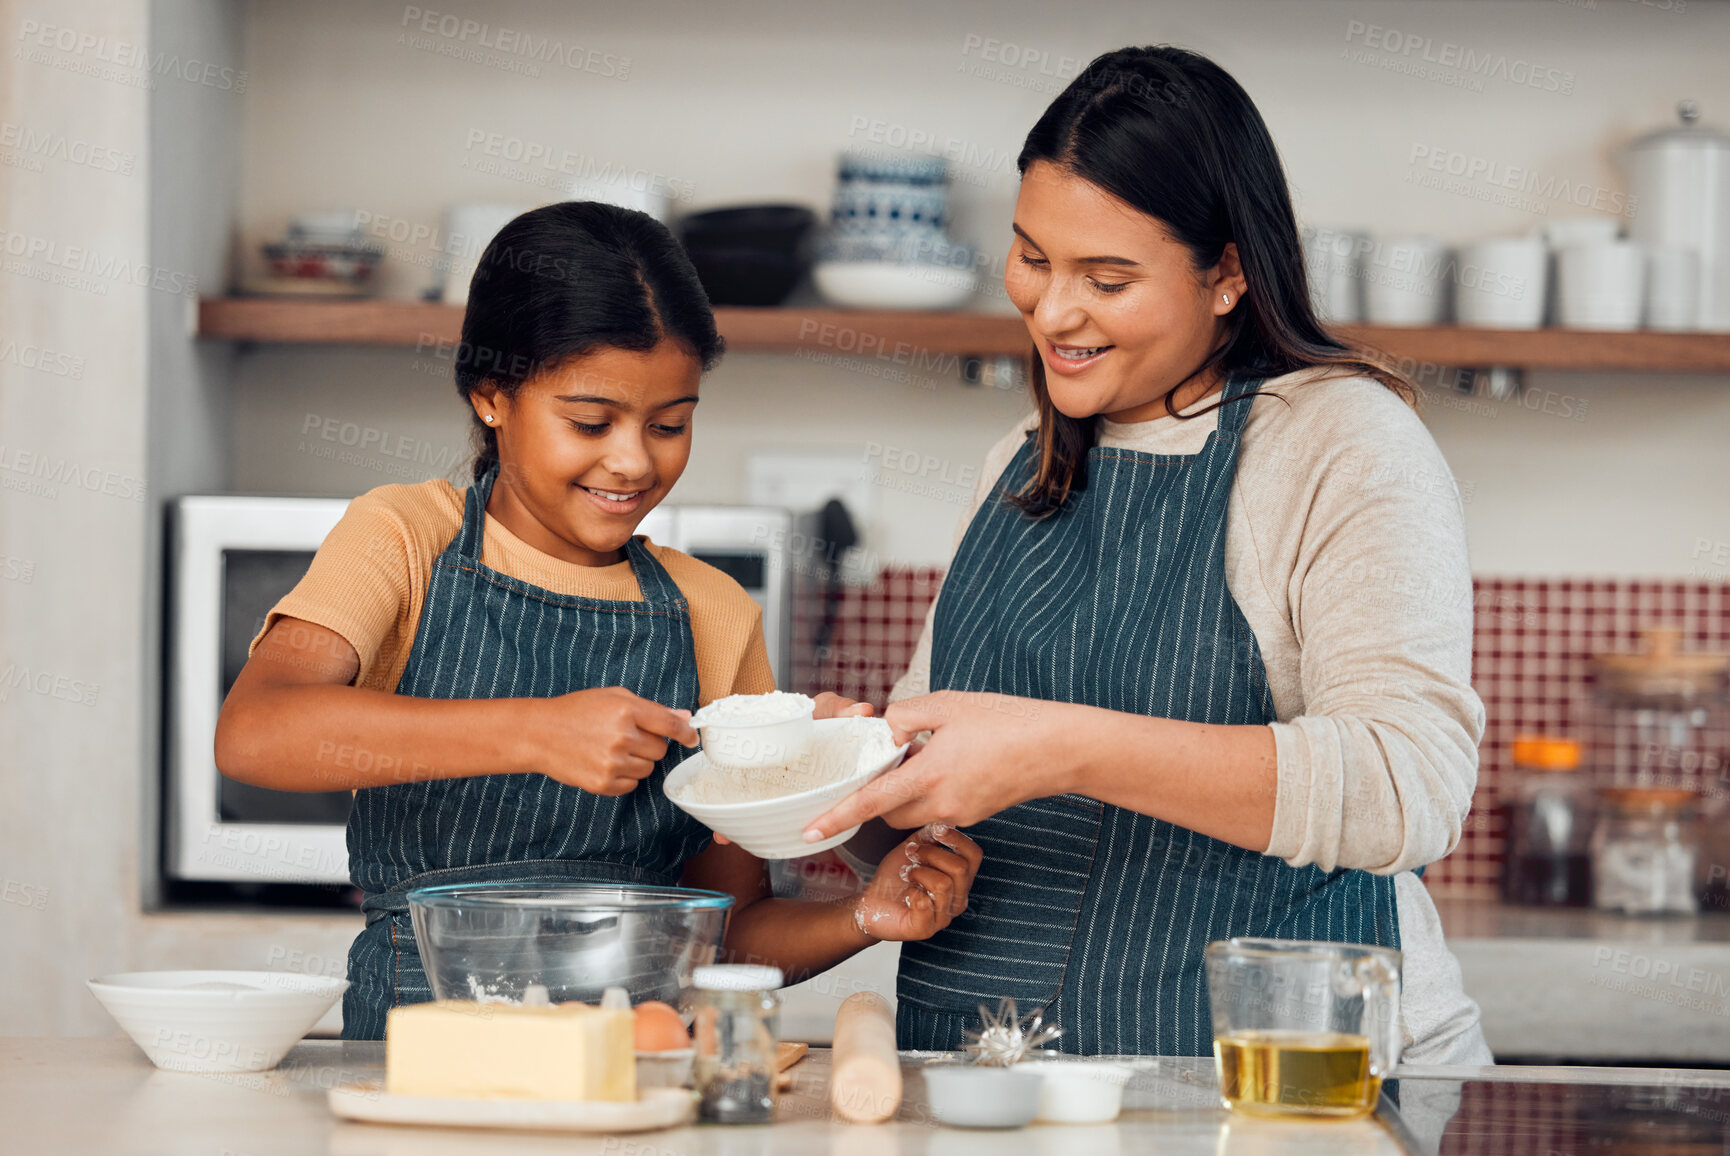 Buy stock photo Learning, family and cooking cake with mother for bonding, wellness and help with smile. Happy family, kitchen and mom teaching young daughter baking skill with flour measurement in home.